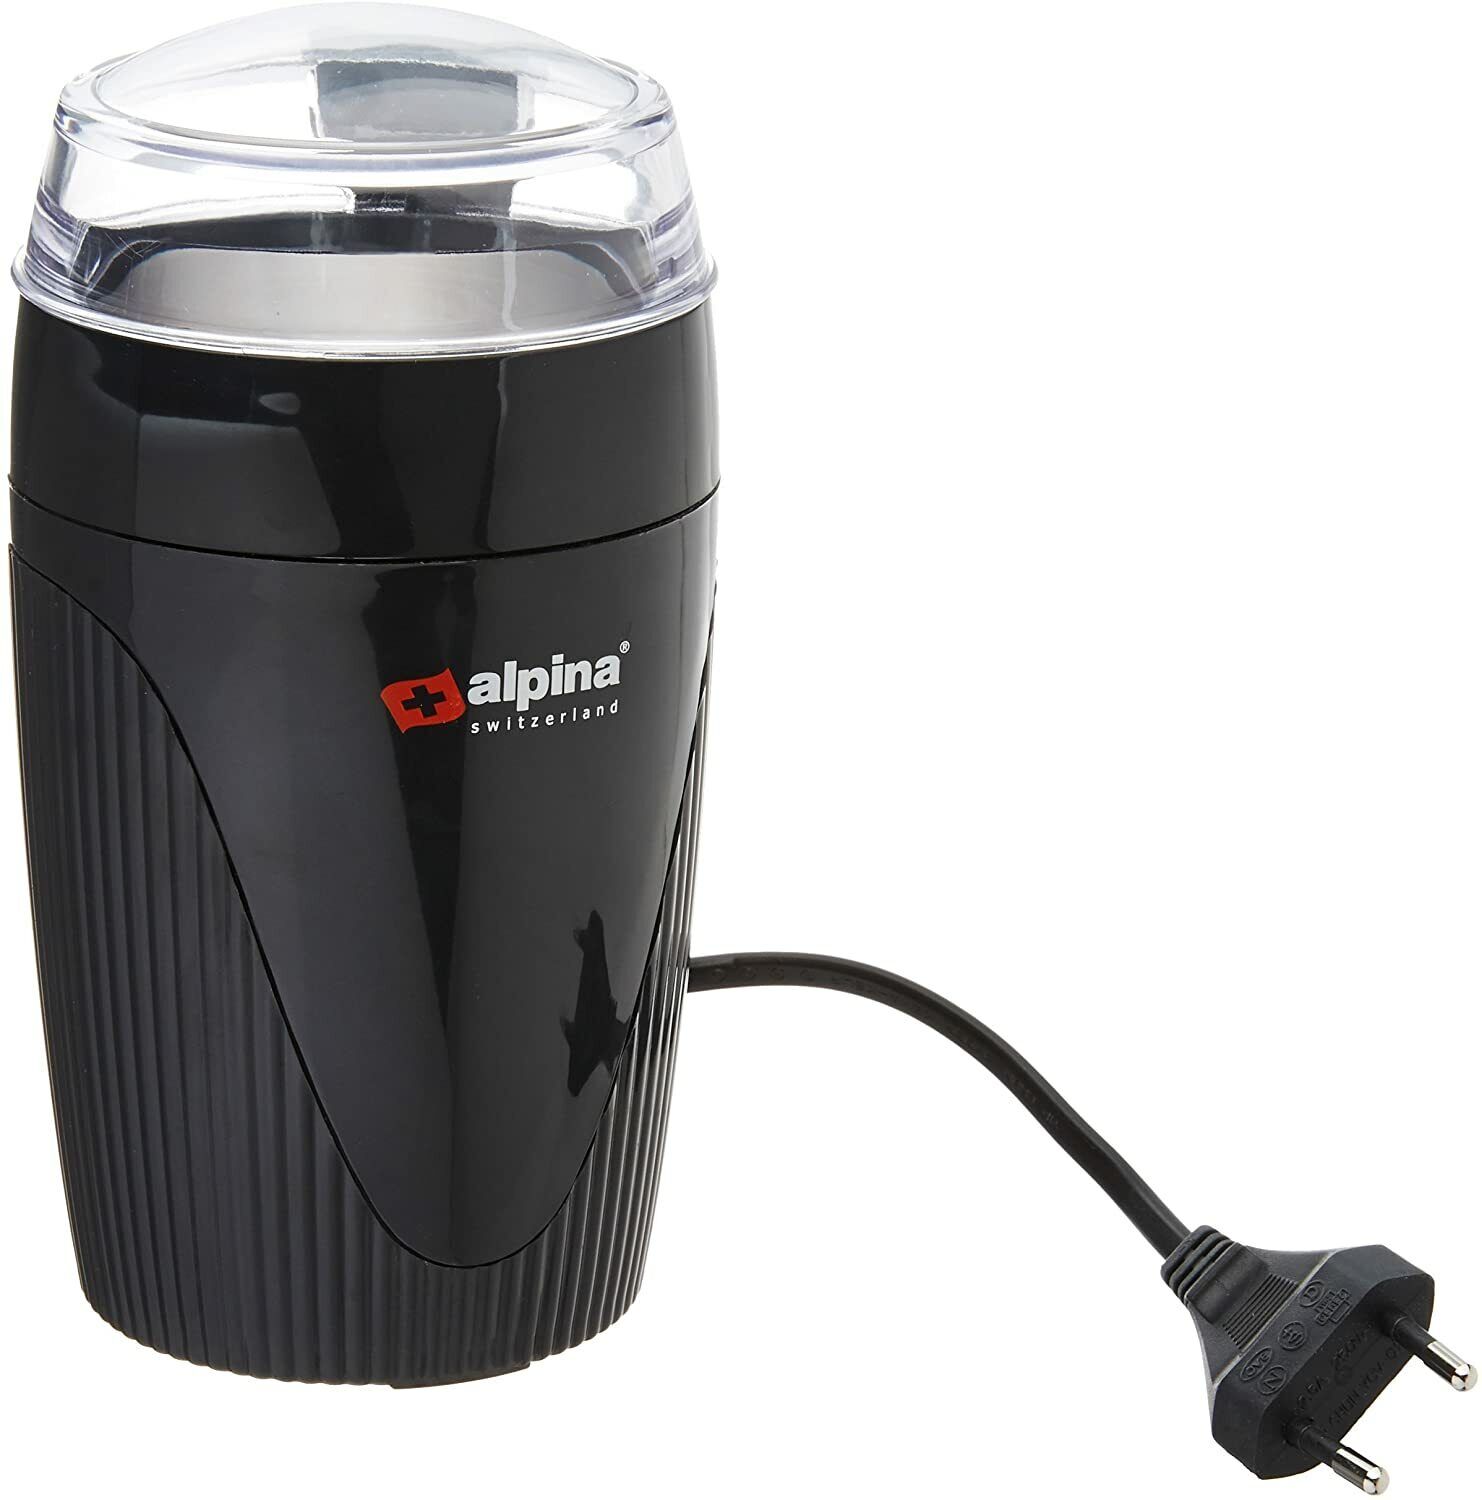 https://www.220stores.com/Shared/Images/Product/Alpina-SF-2818-220-240-Volt-Coffee-Mill-Grinder-220v-Europe-Asia-Africa/SF2818.jpg